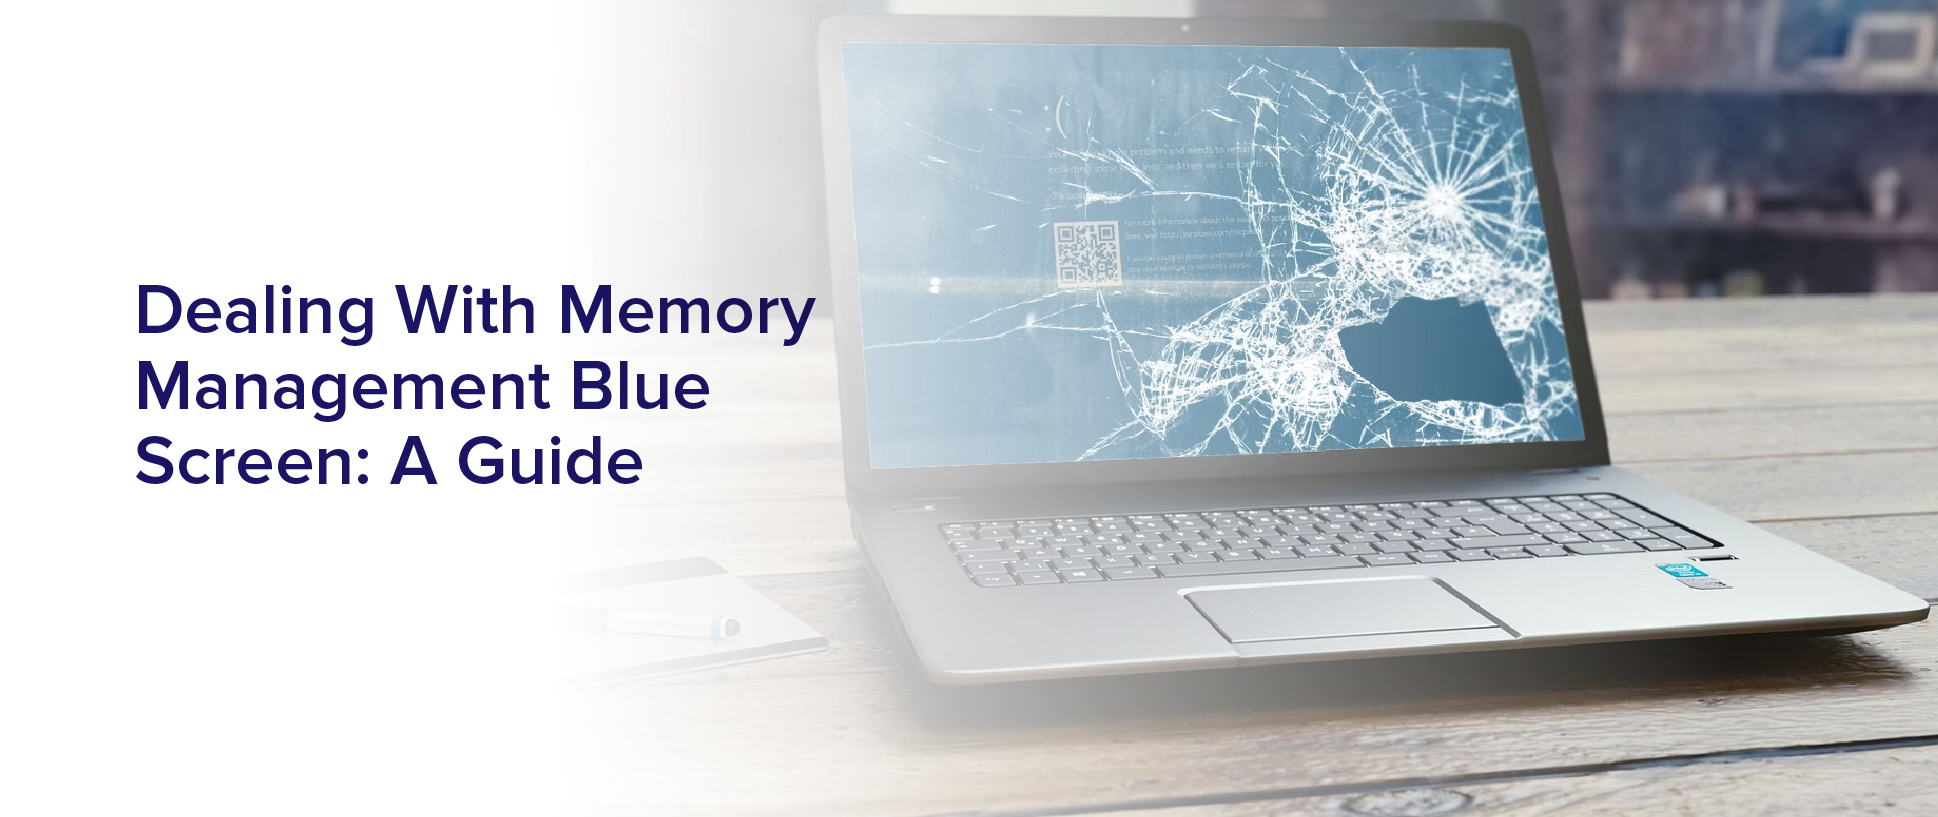 Dealing With Memory Management Blue Screen